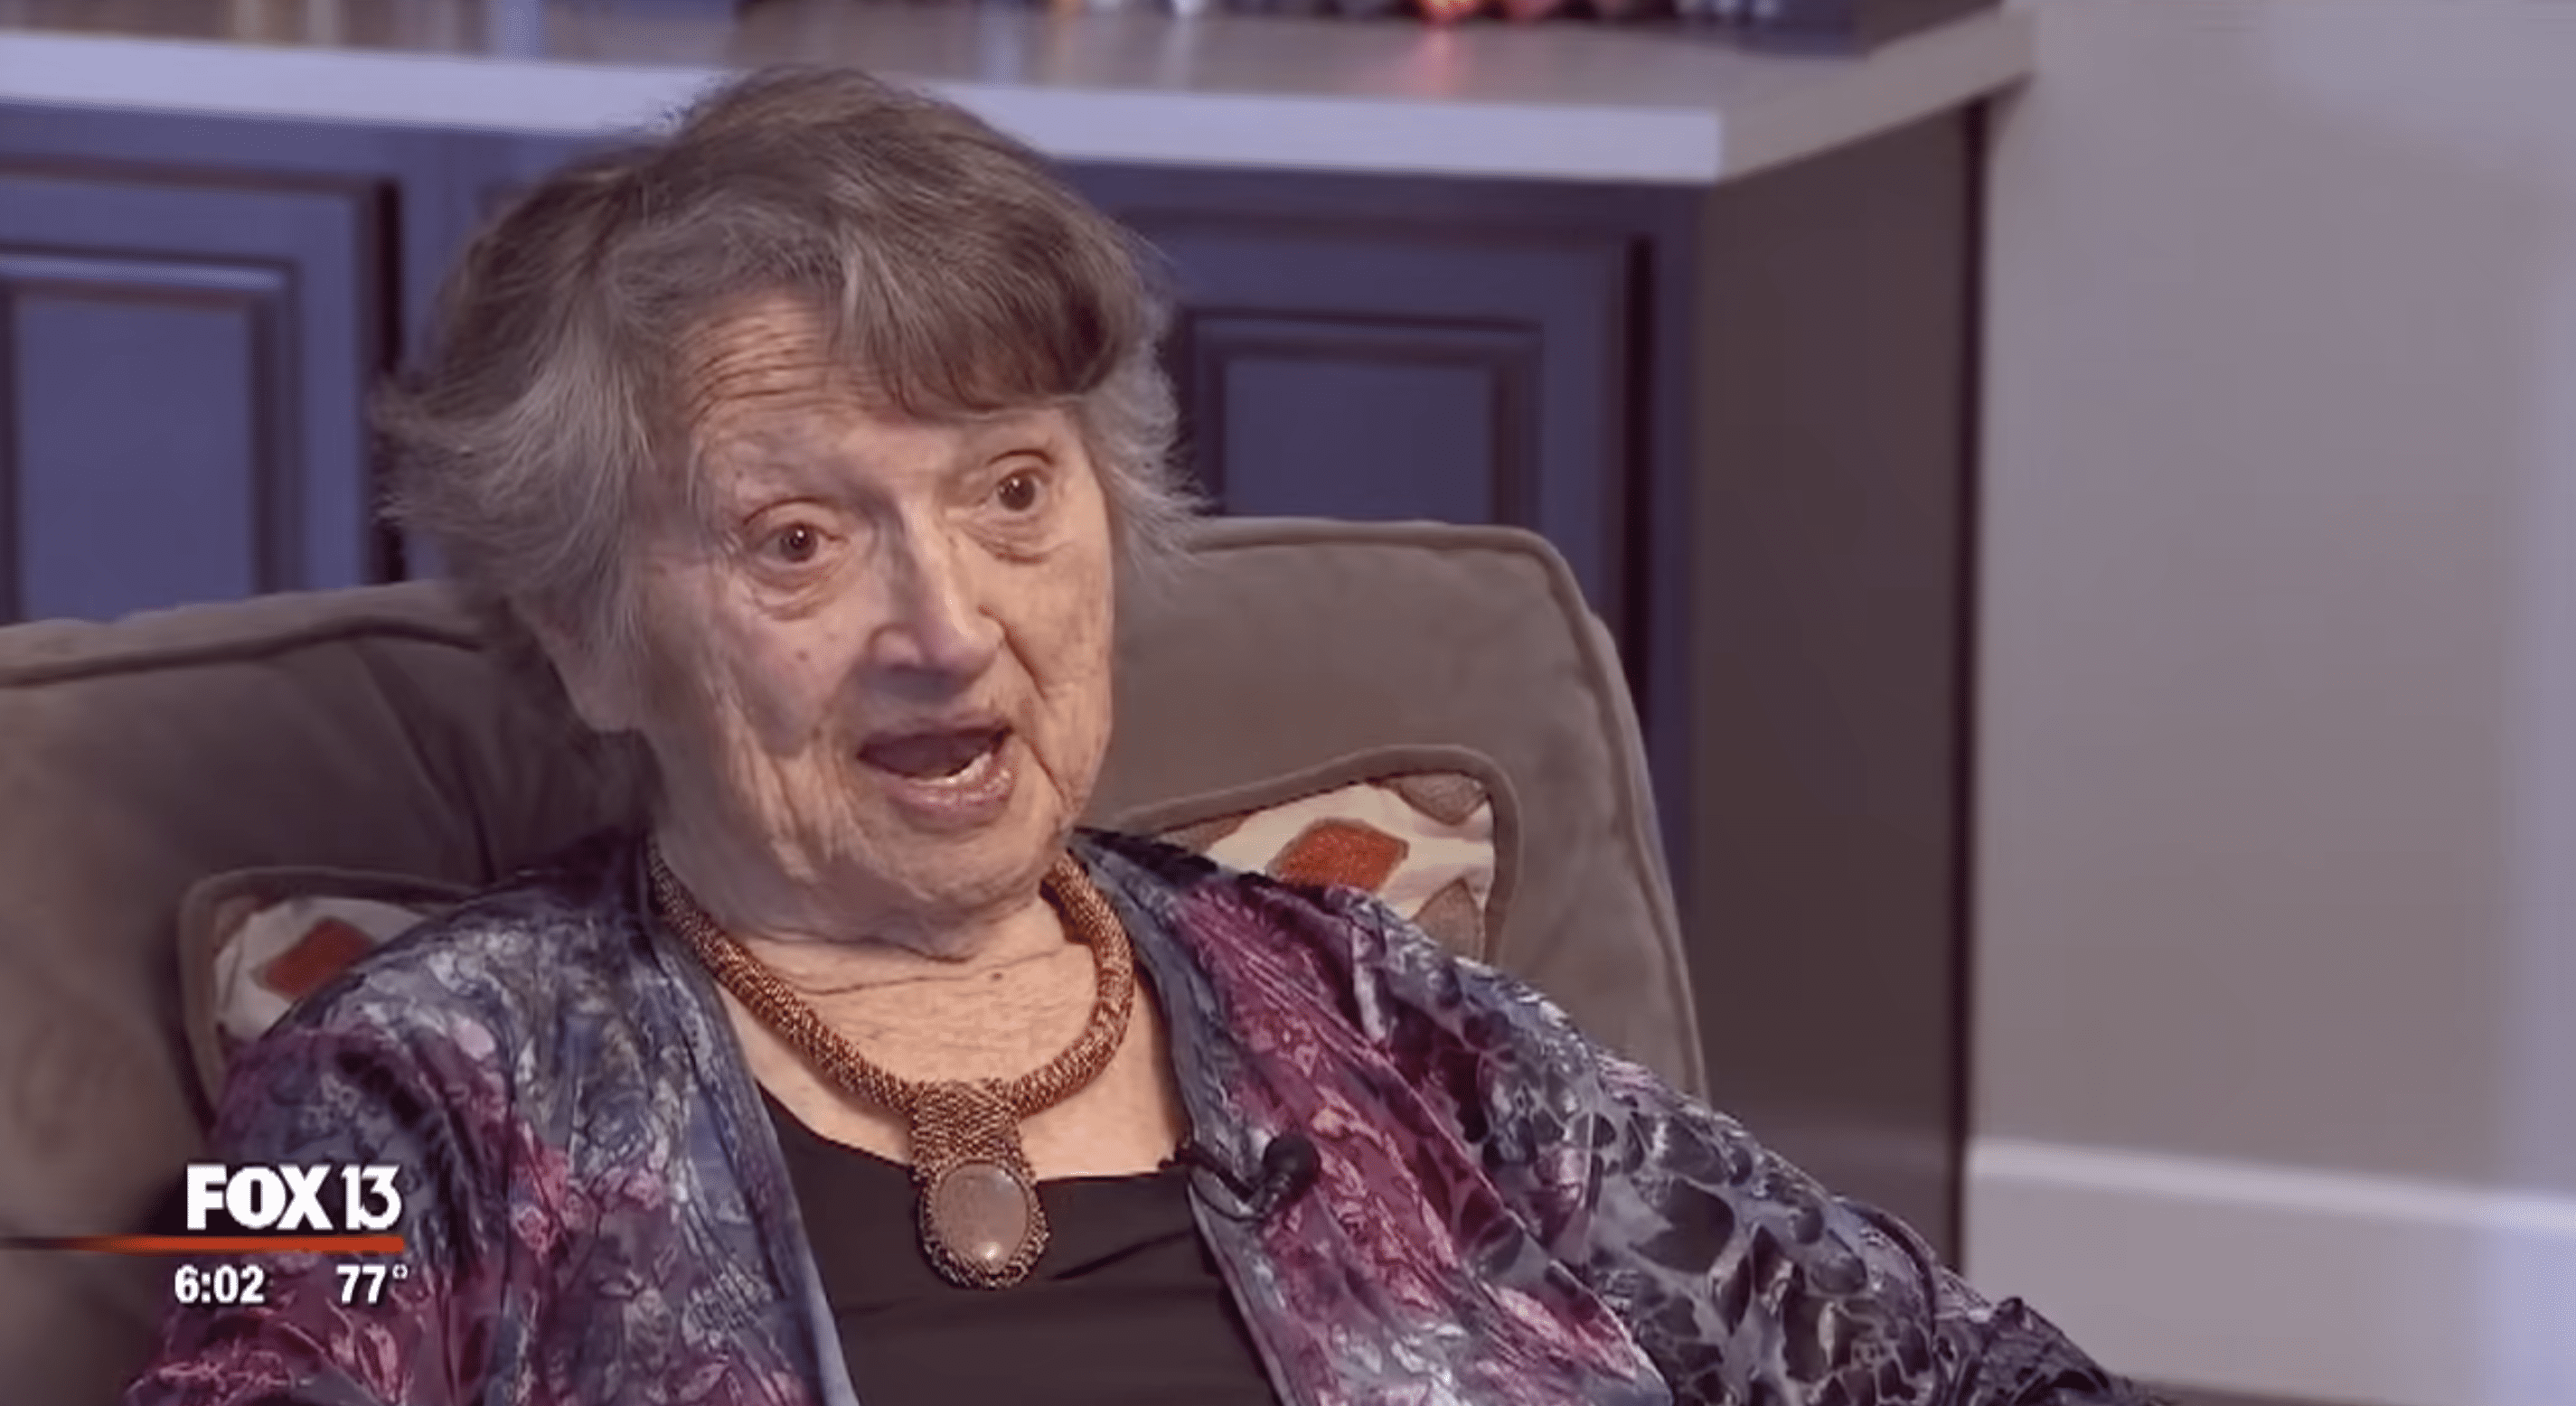 The then 88-year-old Genevieve Purinton shared how she had spent her life thinking her daughter died at birth. | Photo: youtube.com/FOX 13 Tampa Bay 